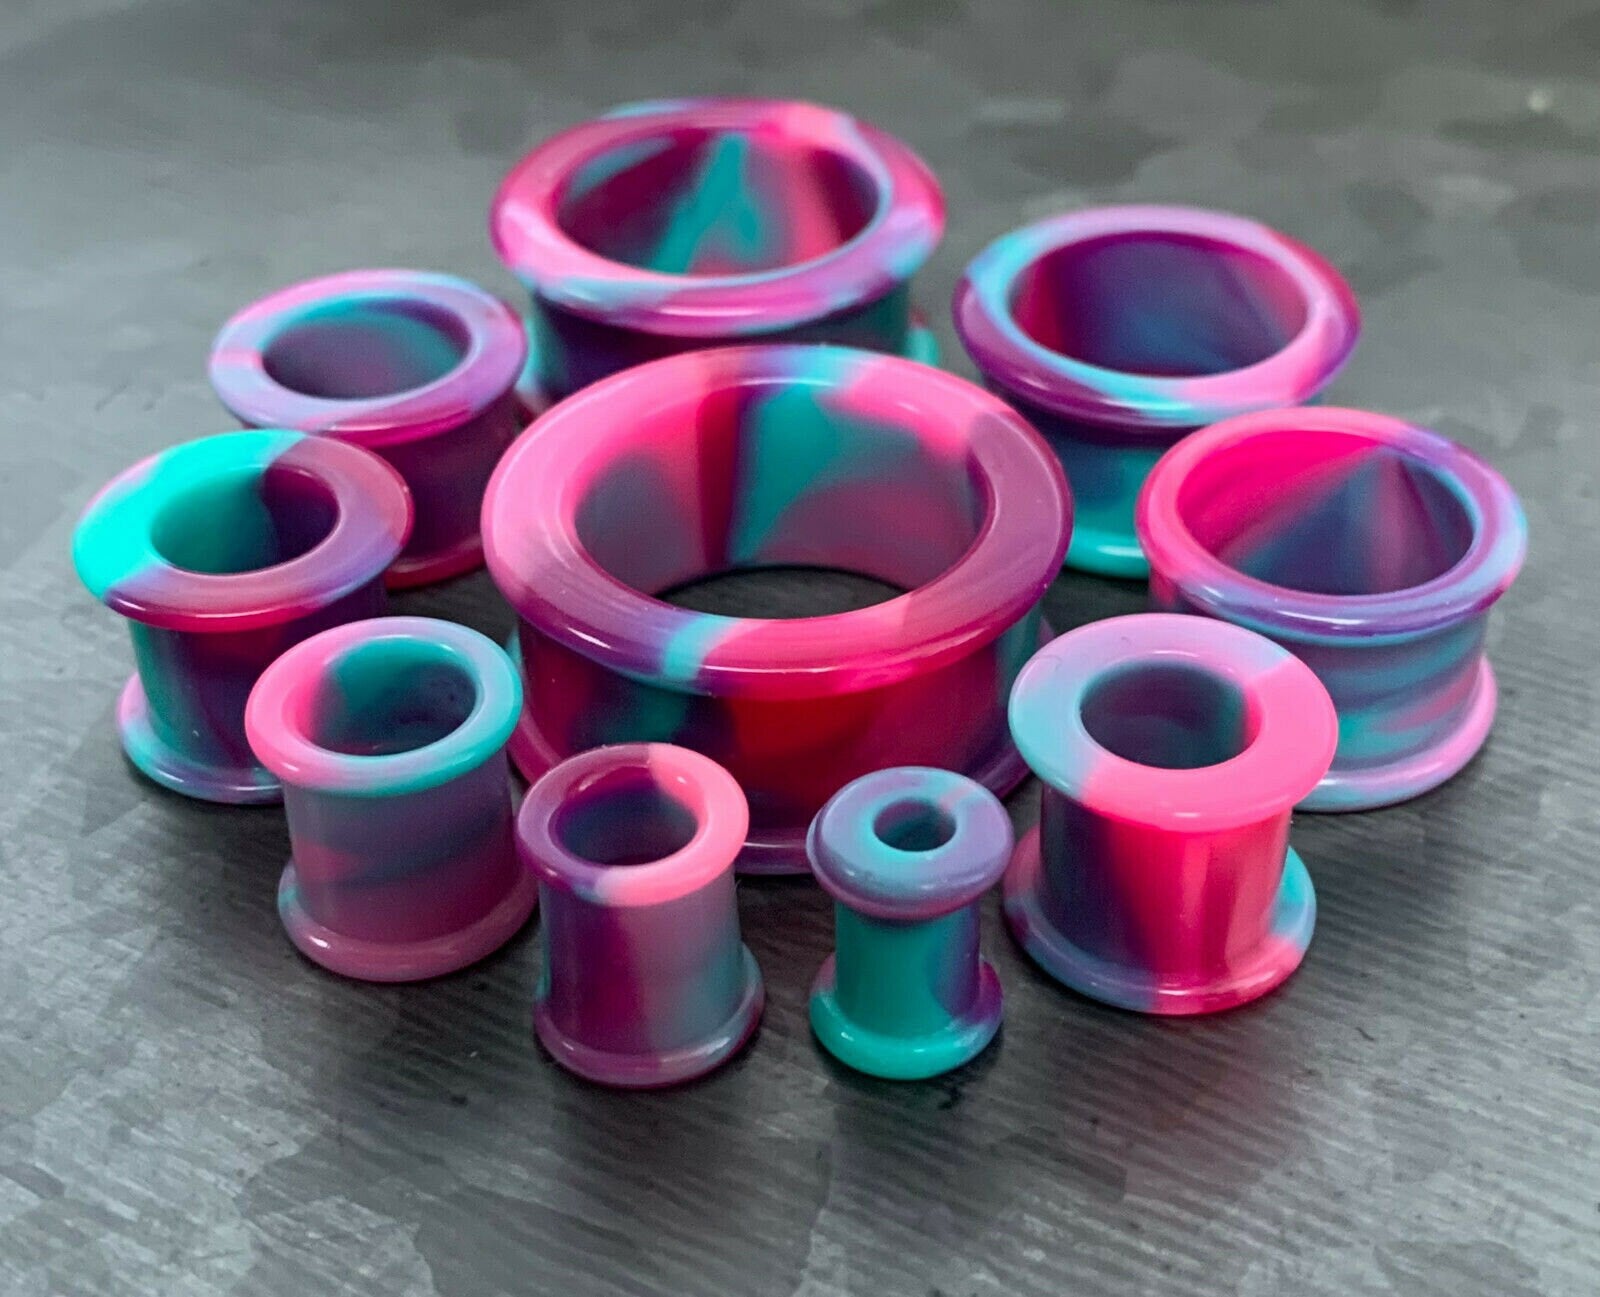 PAIR of Stunning Pink, Purple & Teal Swirl Galaxy Silicone Double Flare Tunnel/Plugs - Gauges 2g (6.5mm) up to 2" (50mm) available!